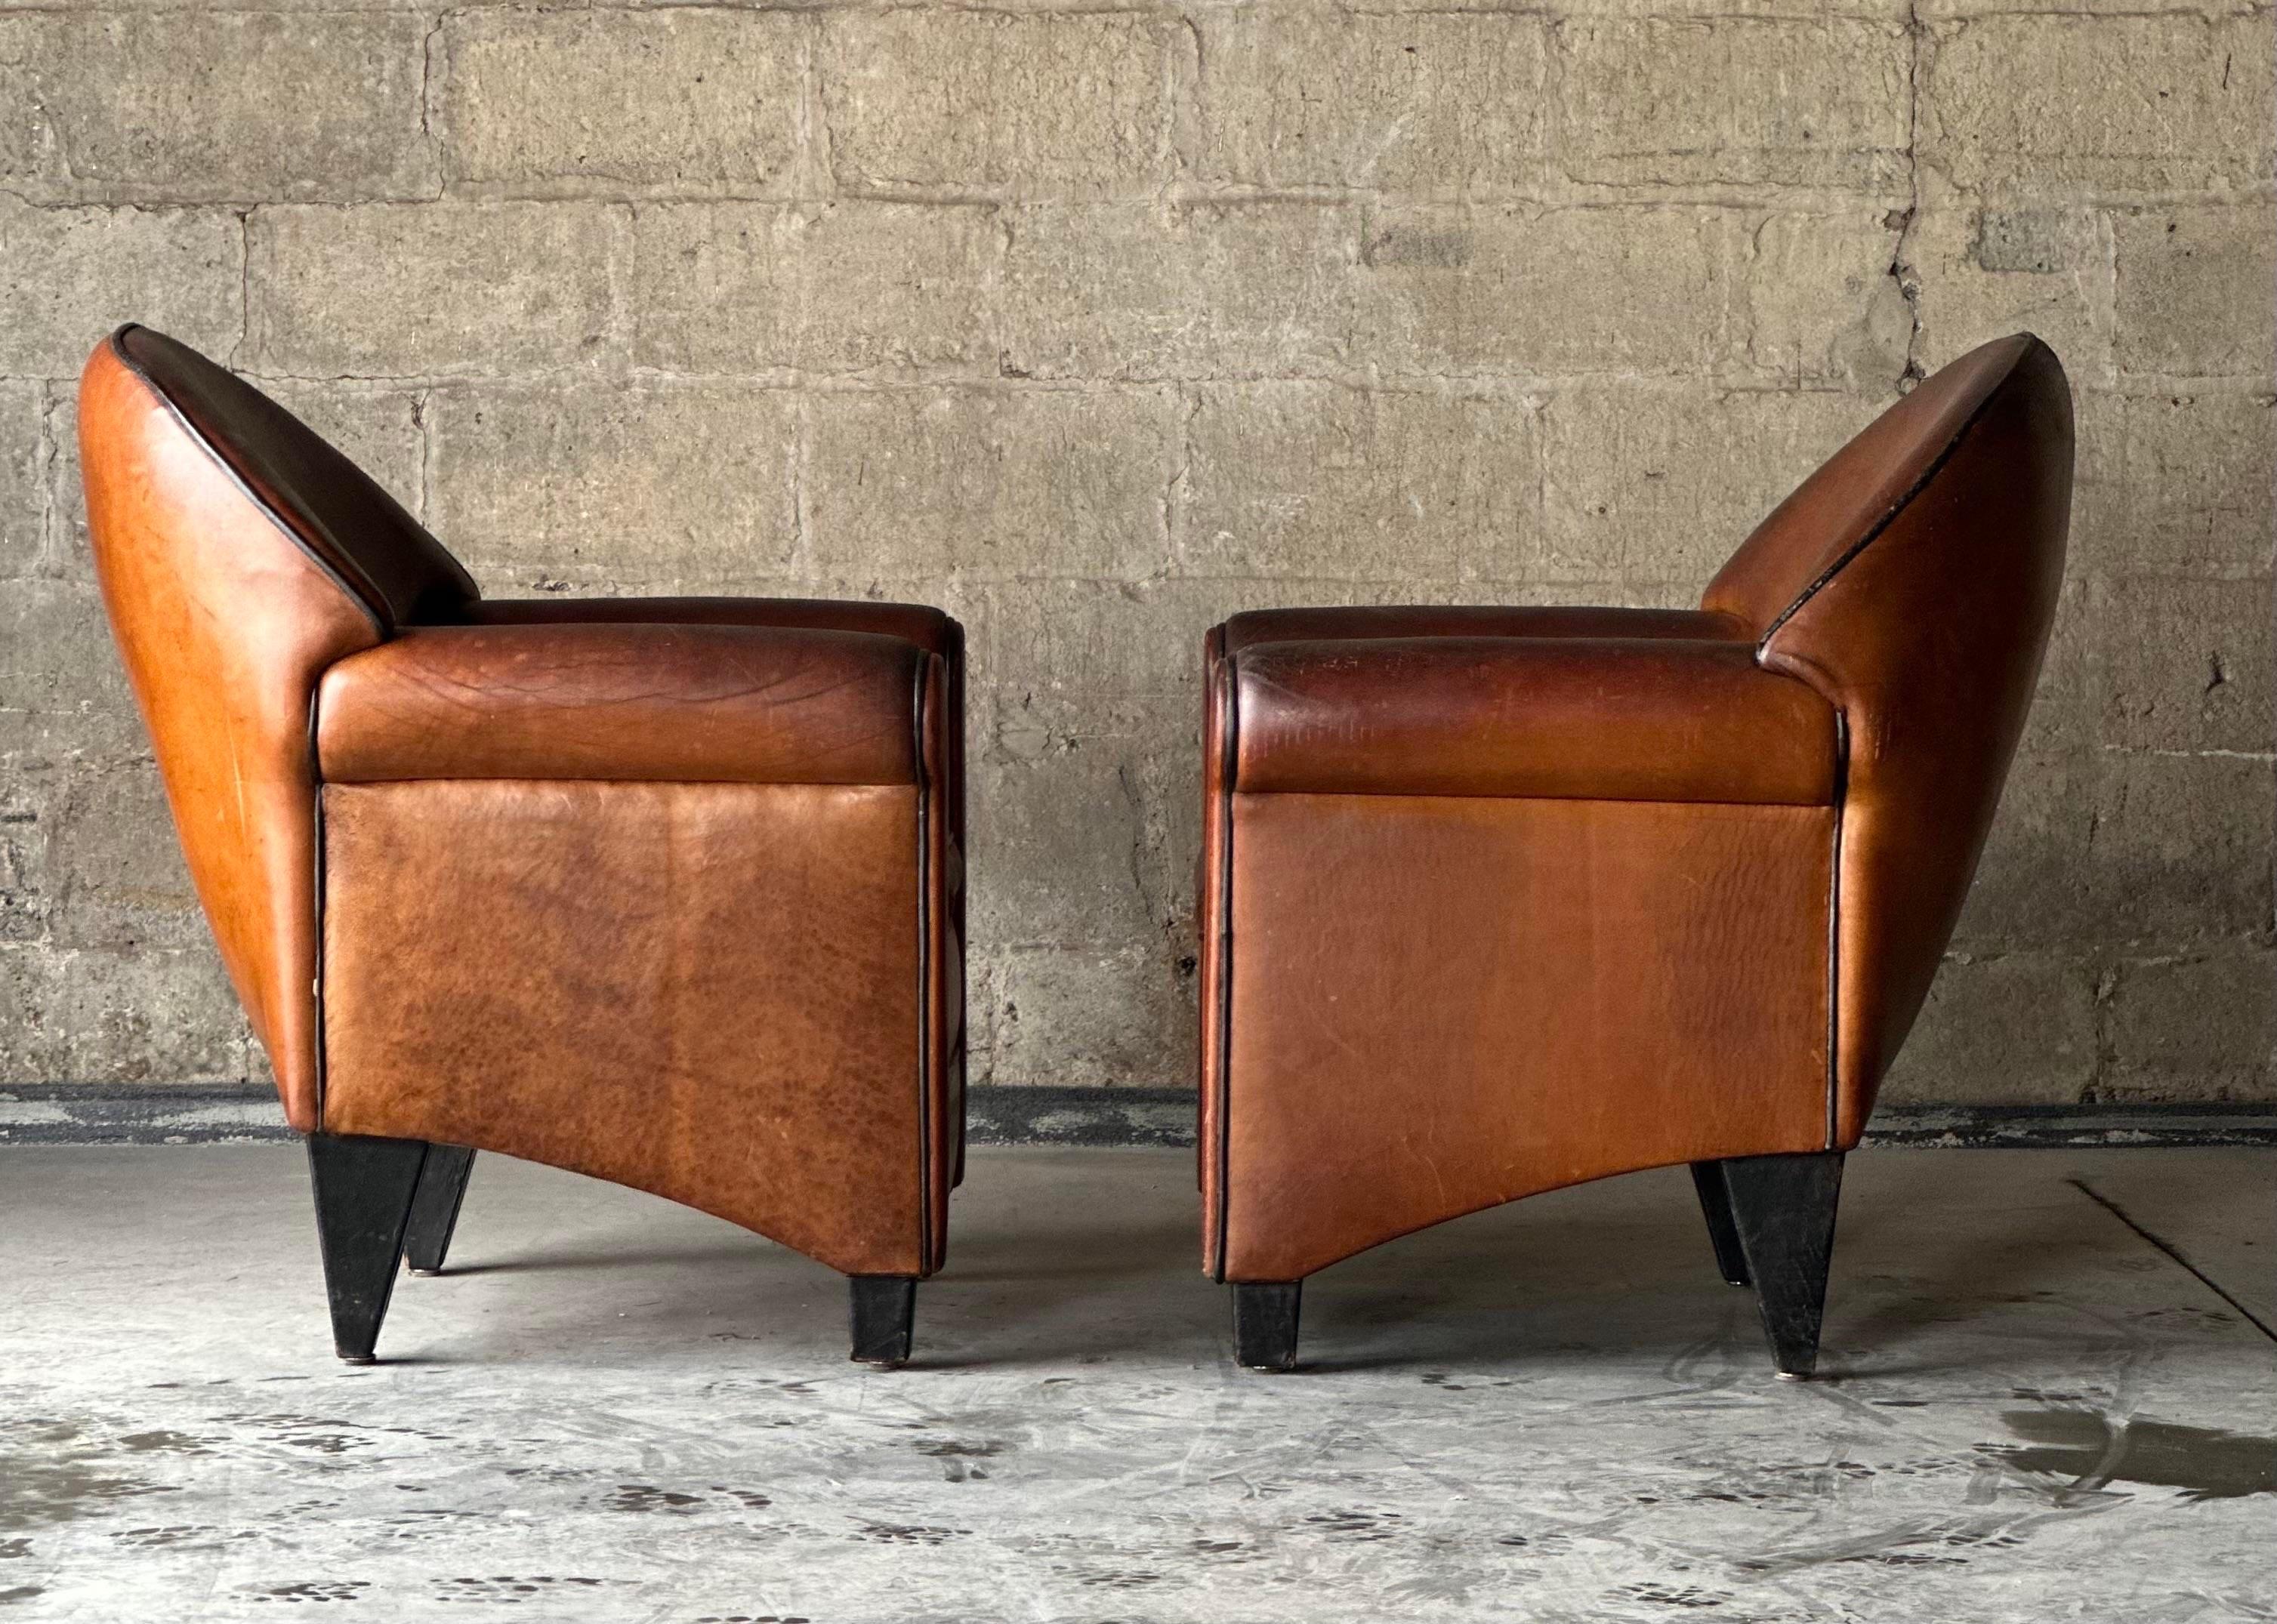 A pair of ‘Monet’ Art Deco club chairs by Bart van Bekhoven for Artistiek. Upholstered throughout in brown sheep’s leather, with black leather covered legs.